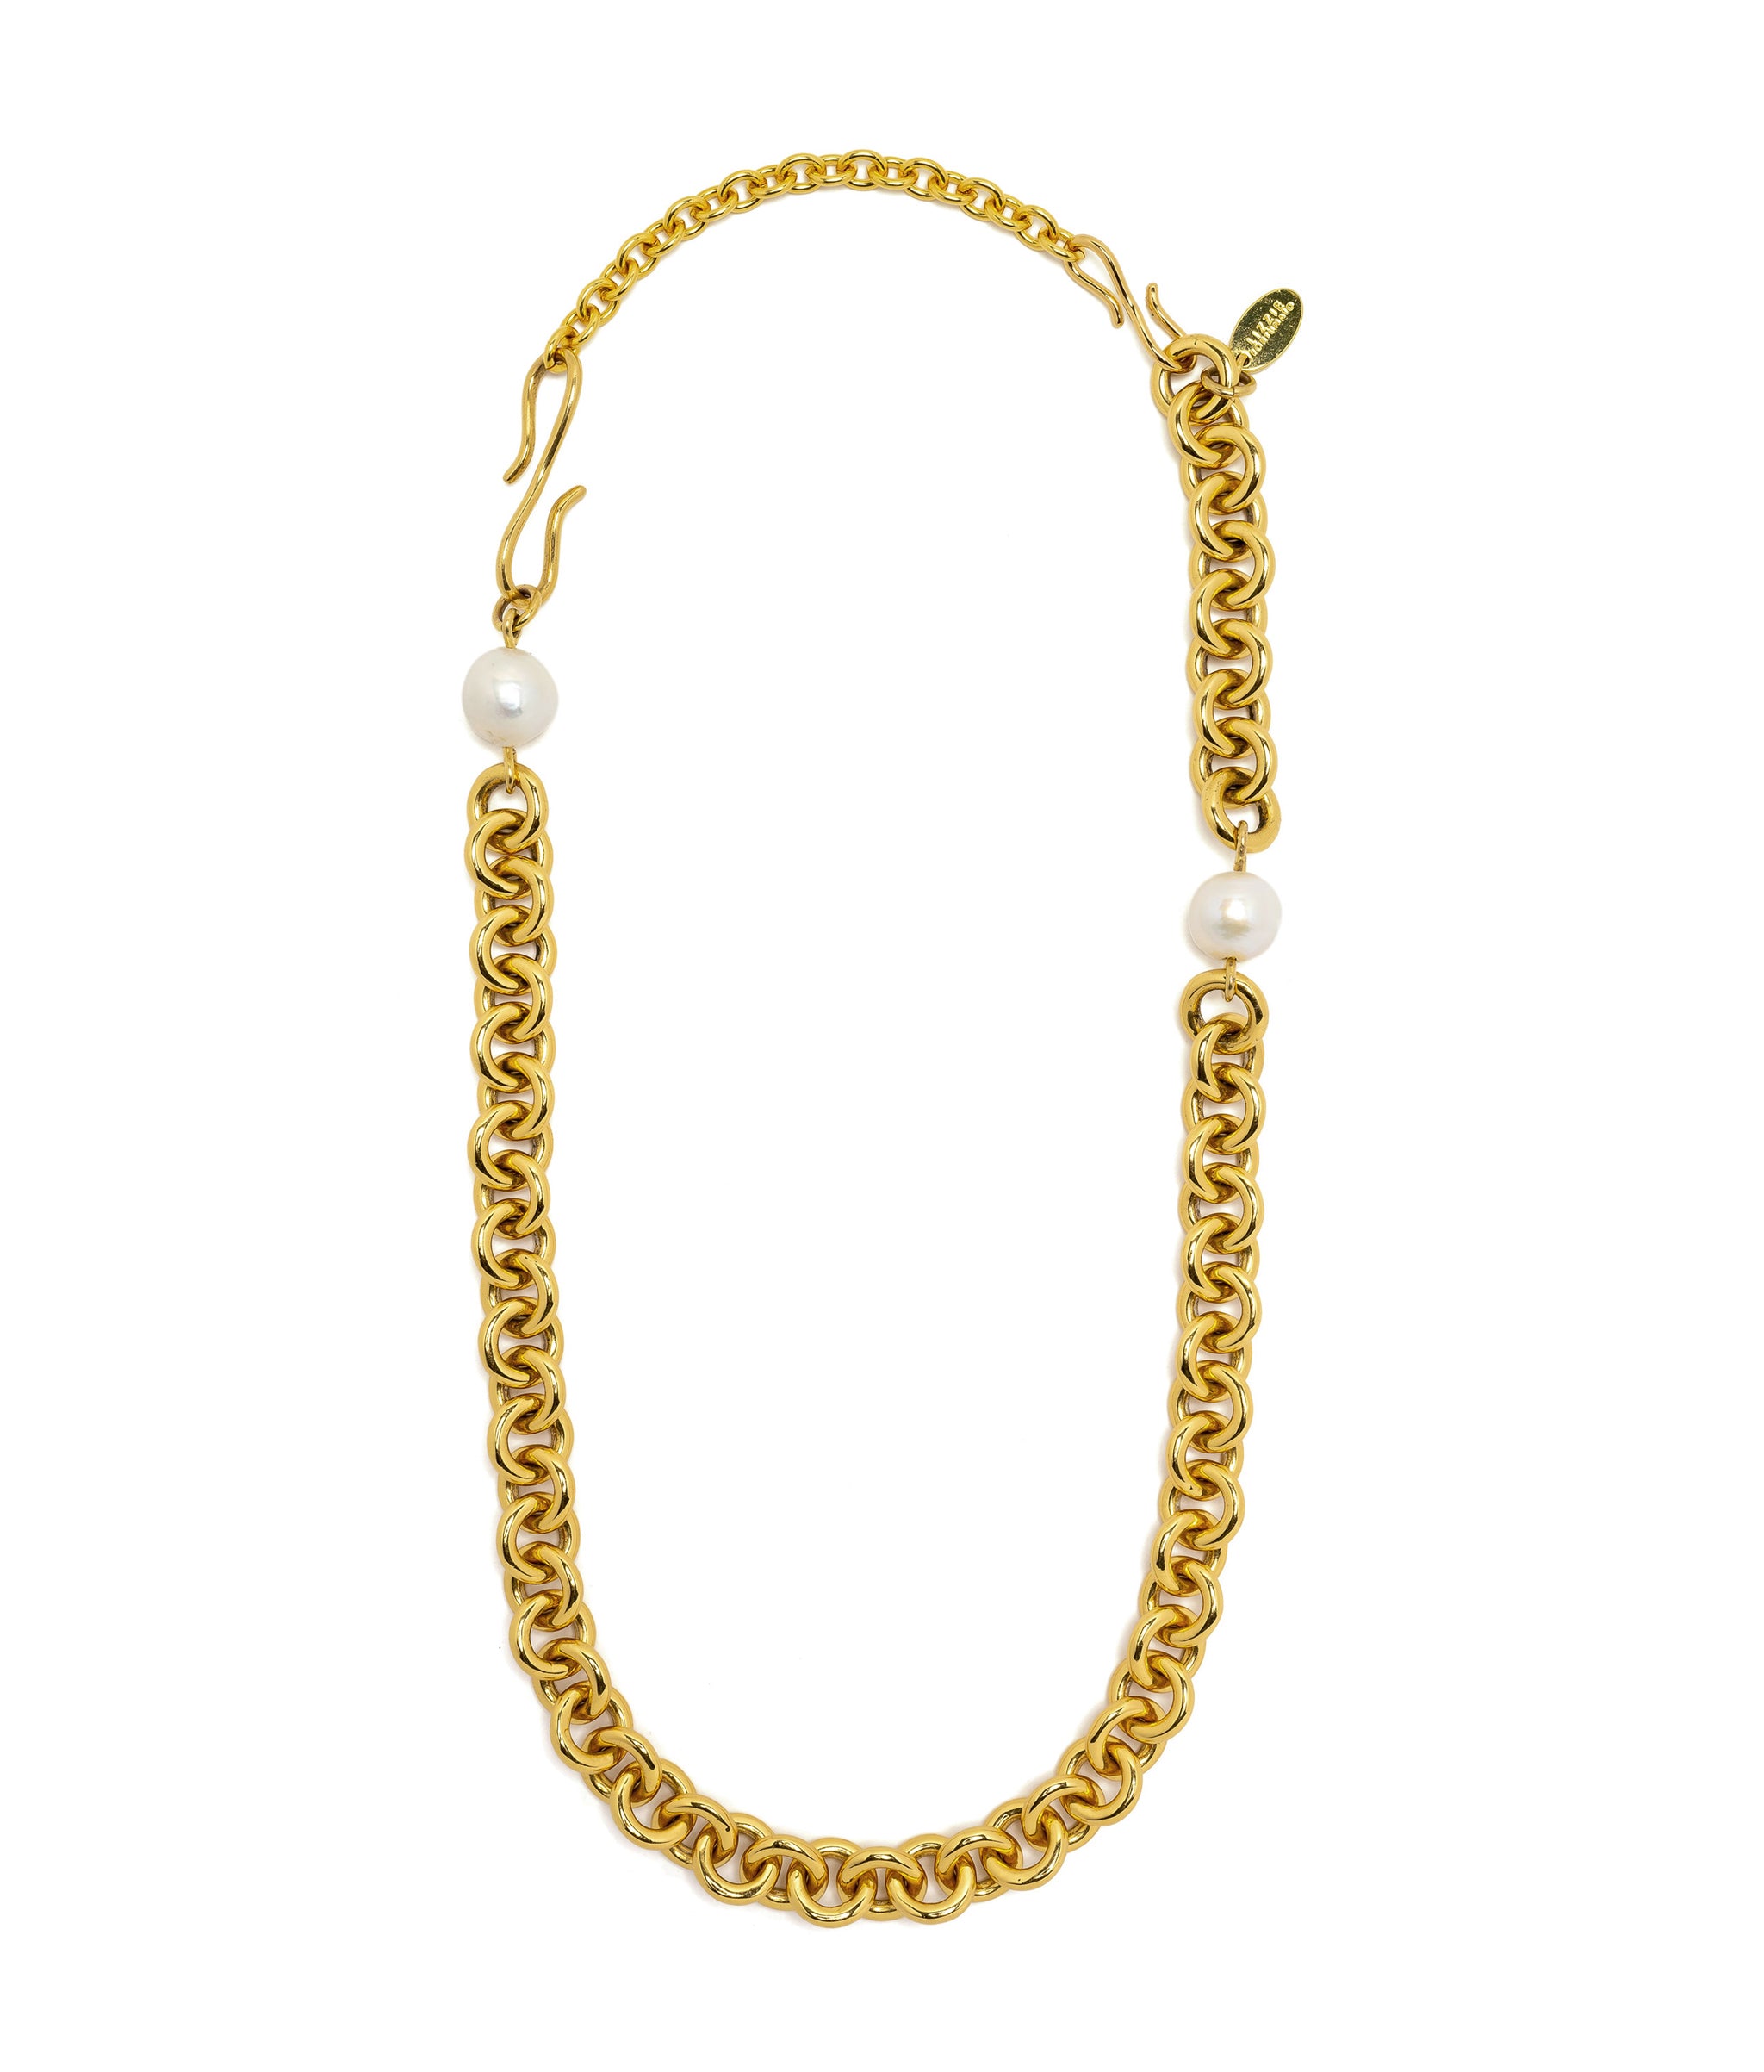 4.25" Cable Gold Extender. Gold-plated brass cable chain with S-hook, attached to gold link necklace.